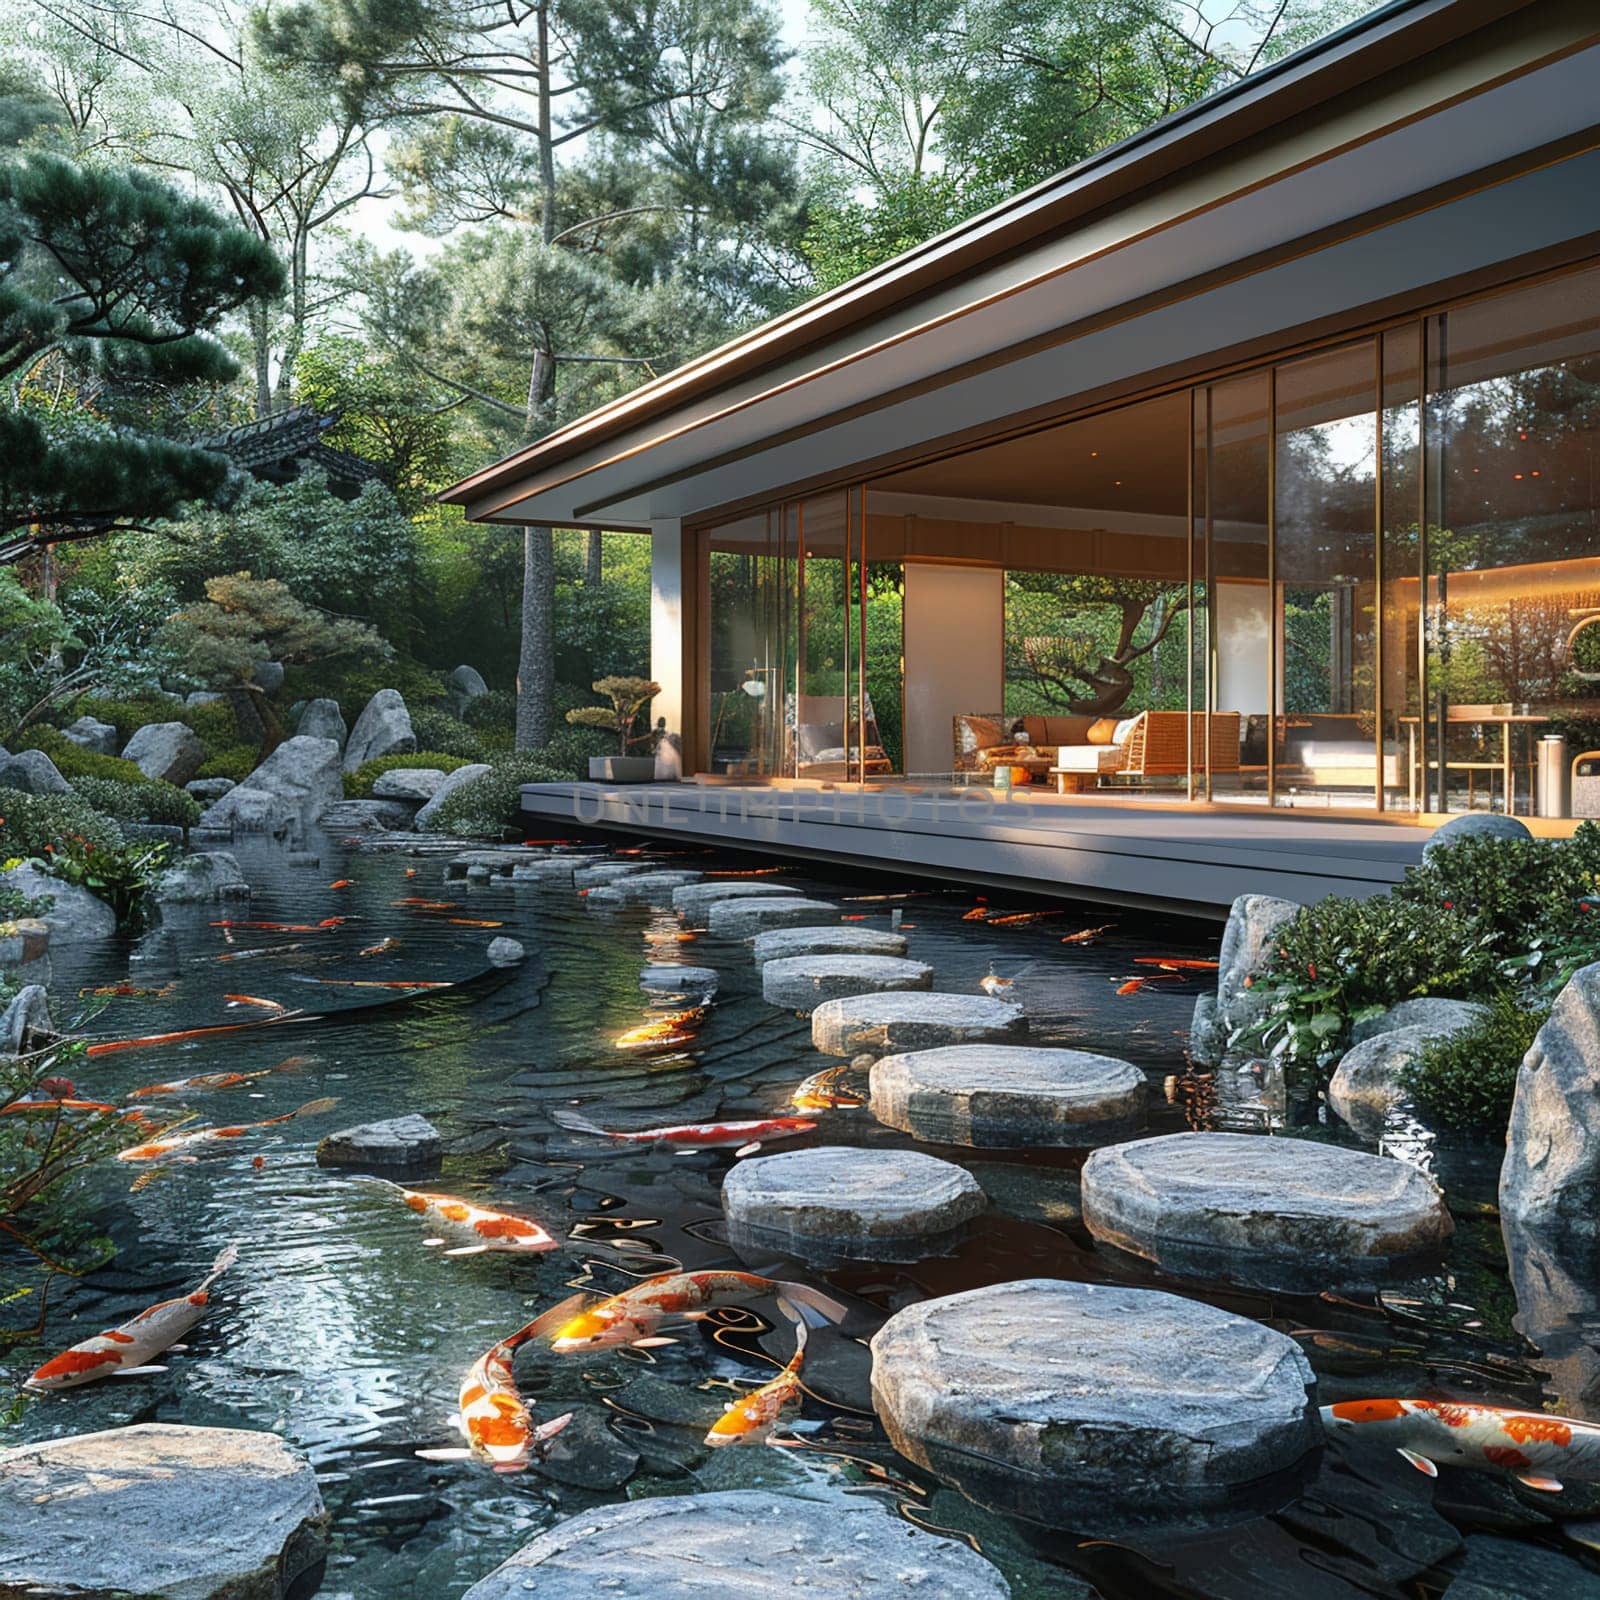 Tranquil Japanese koi pond garden with stepping stones and traditional tea house.3D render